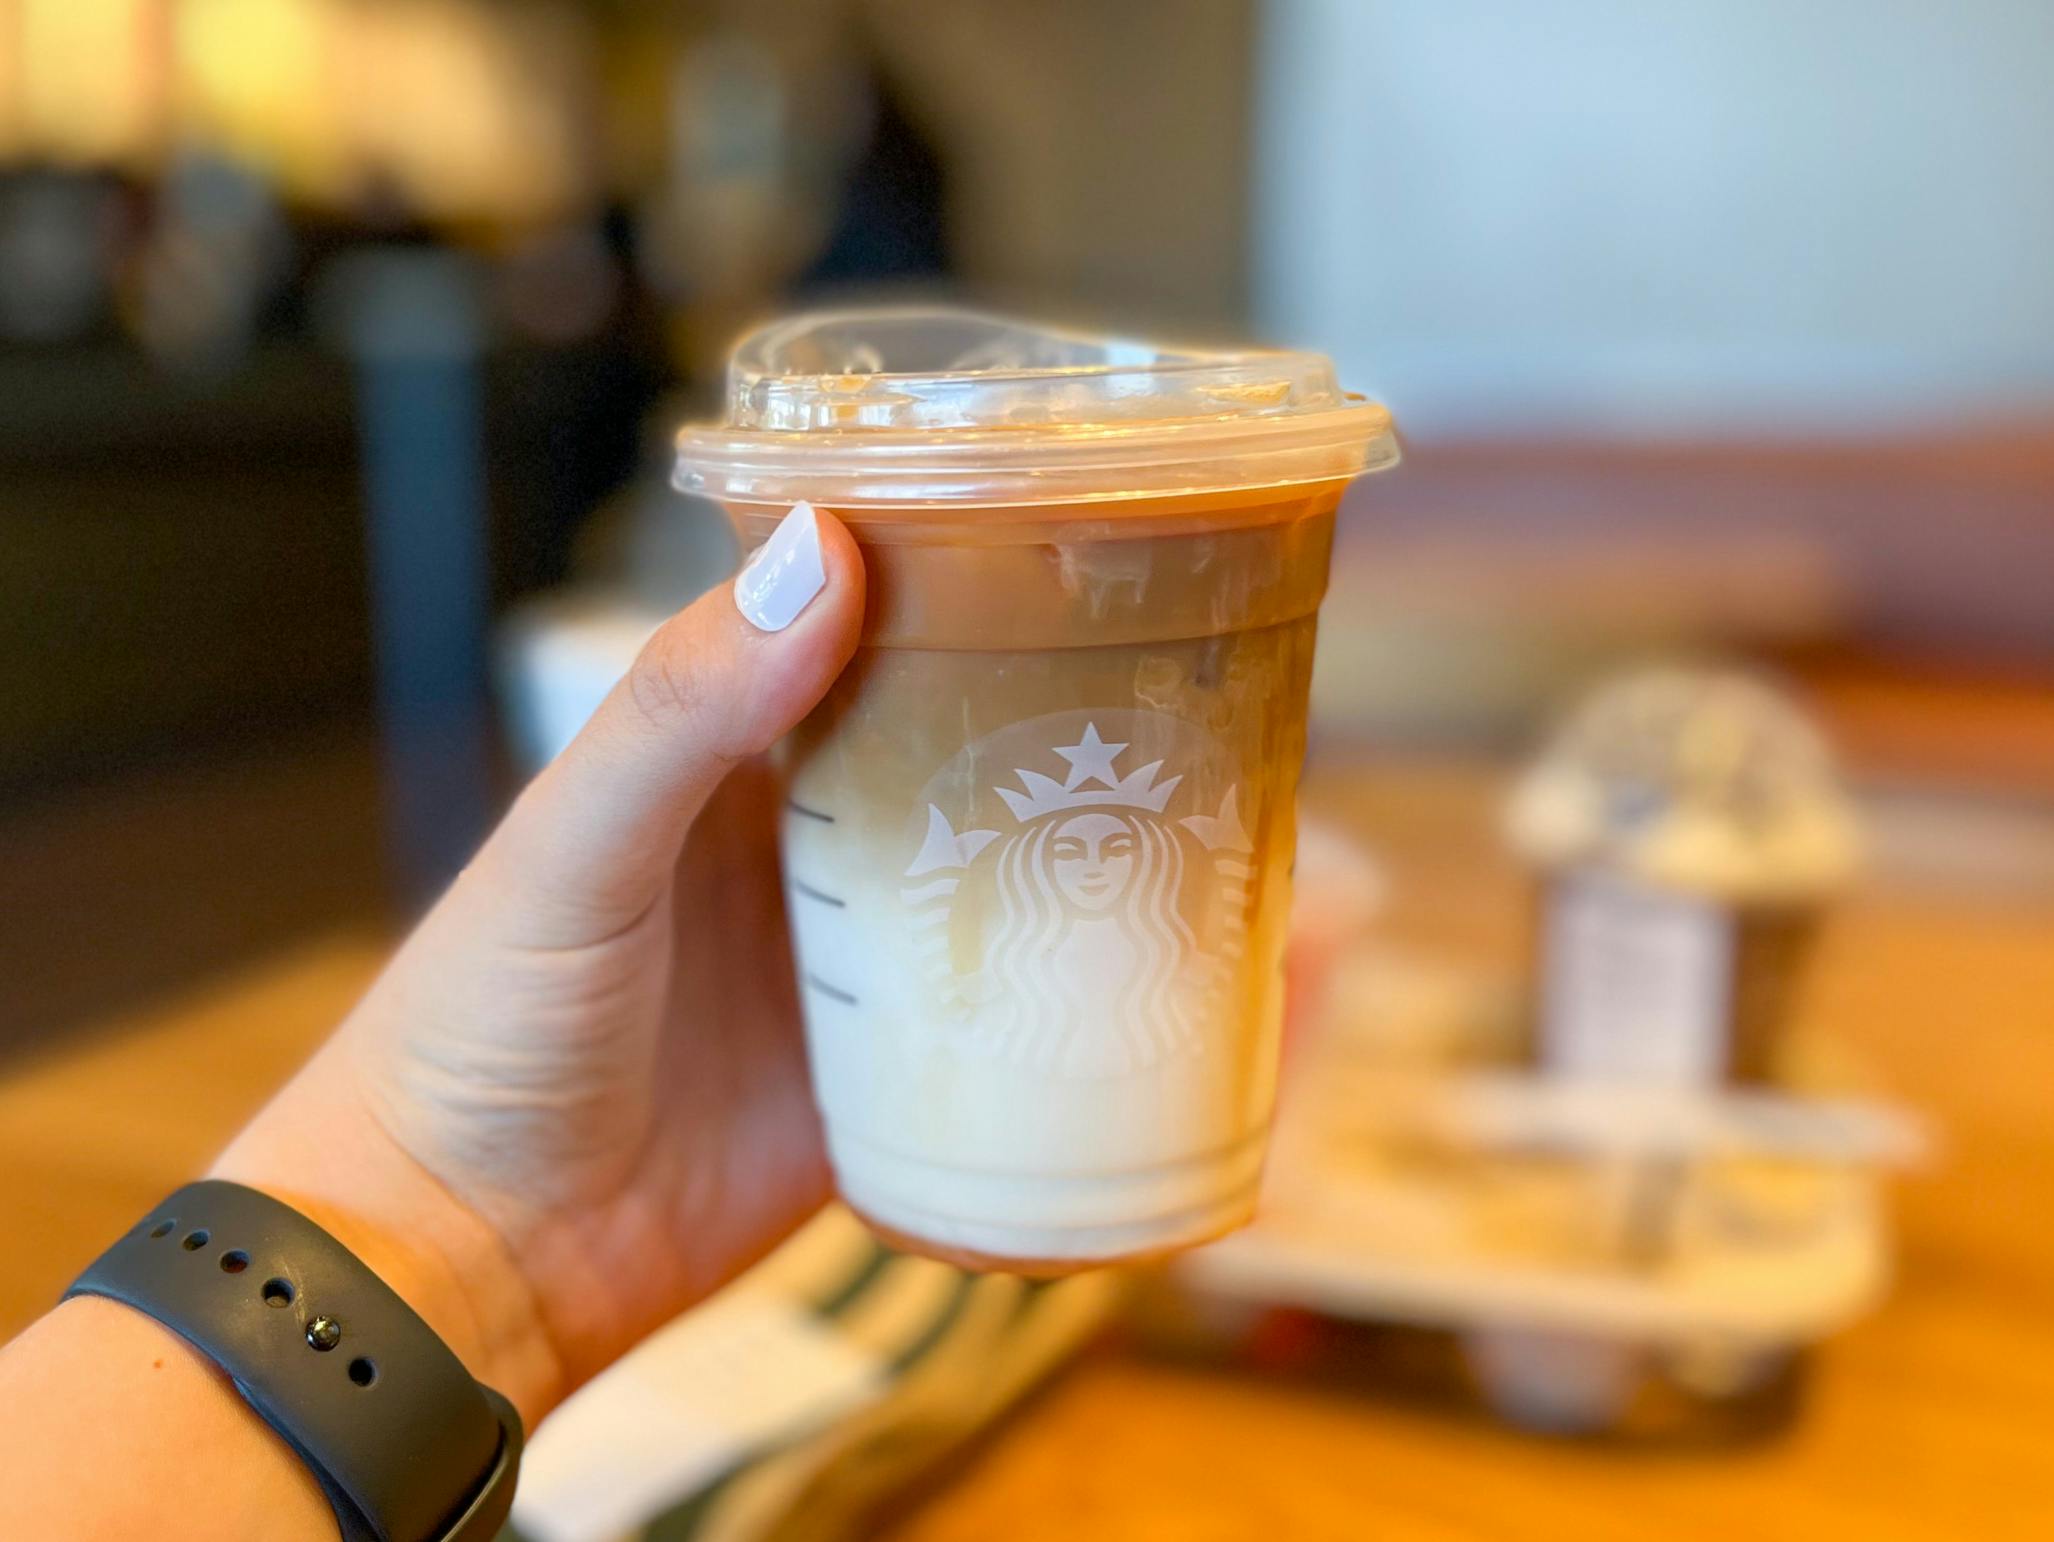 A person's hand holding up a Grande Caramel Macchiato in front of a table of more drinks at Starbucks.